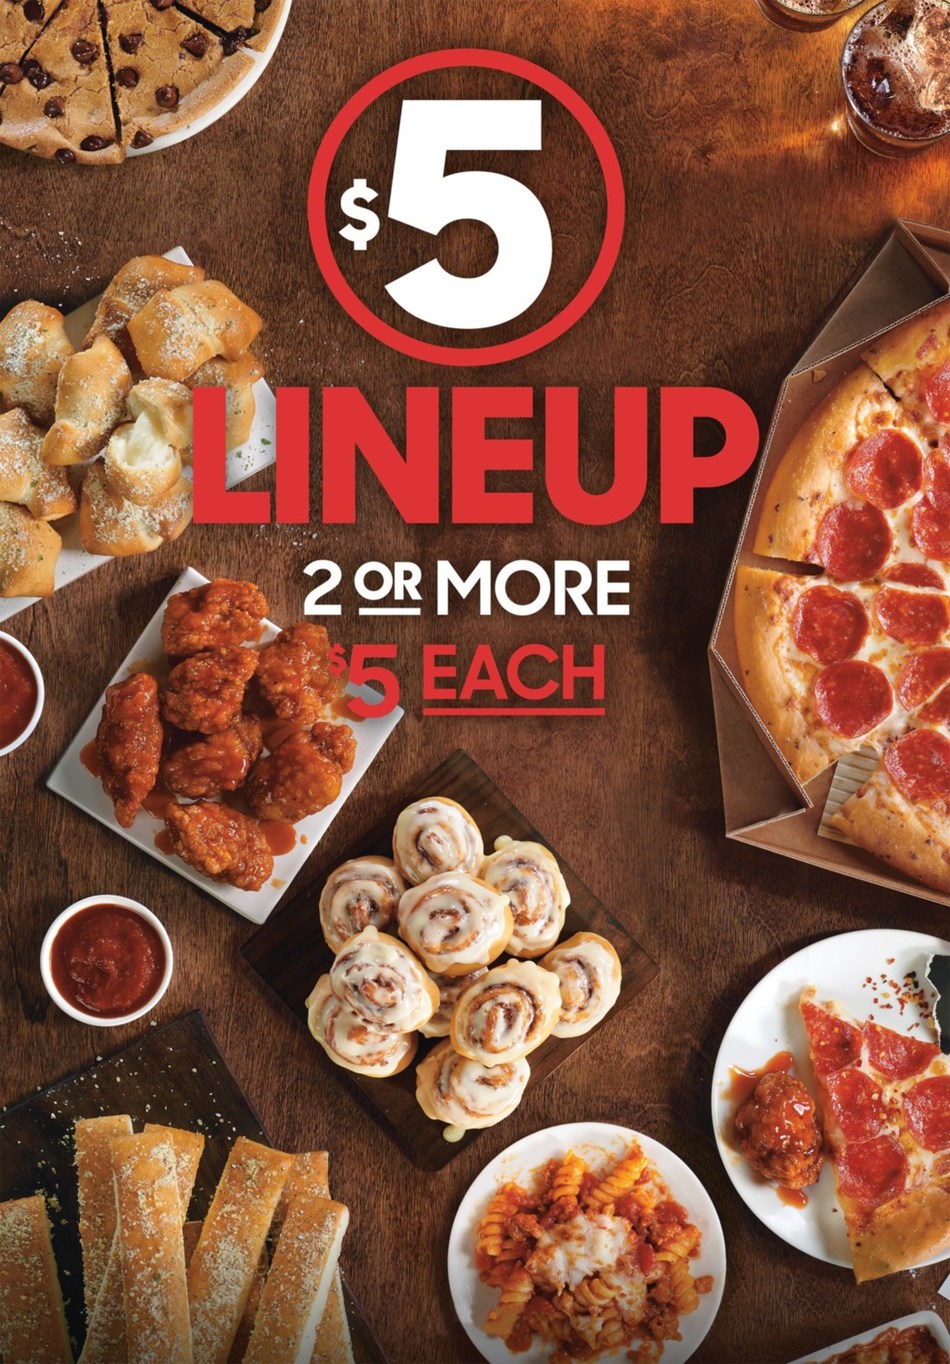 Pizza Hut Launches 5 Lineup Stacked With Pizzas And Other Craveable Menu Options